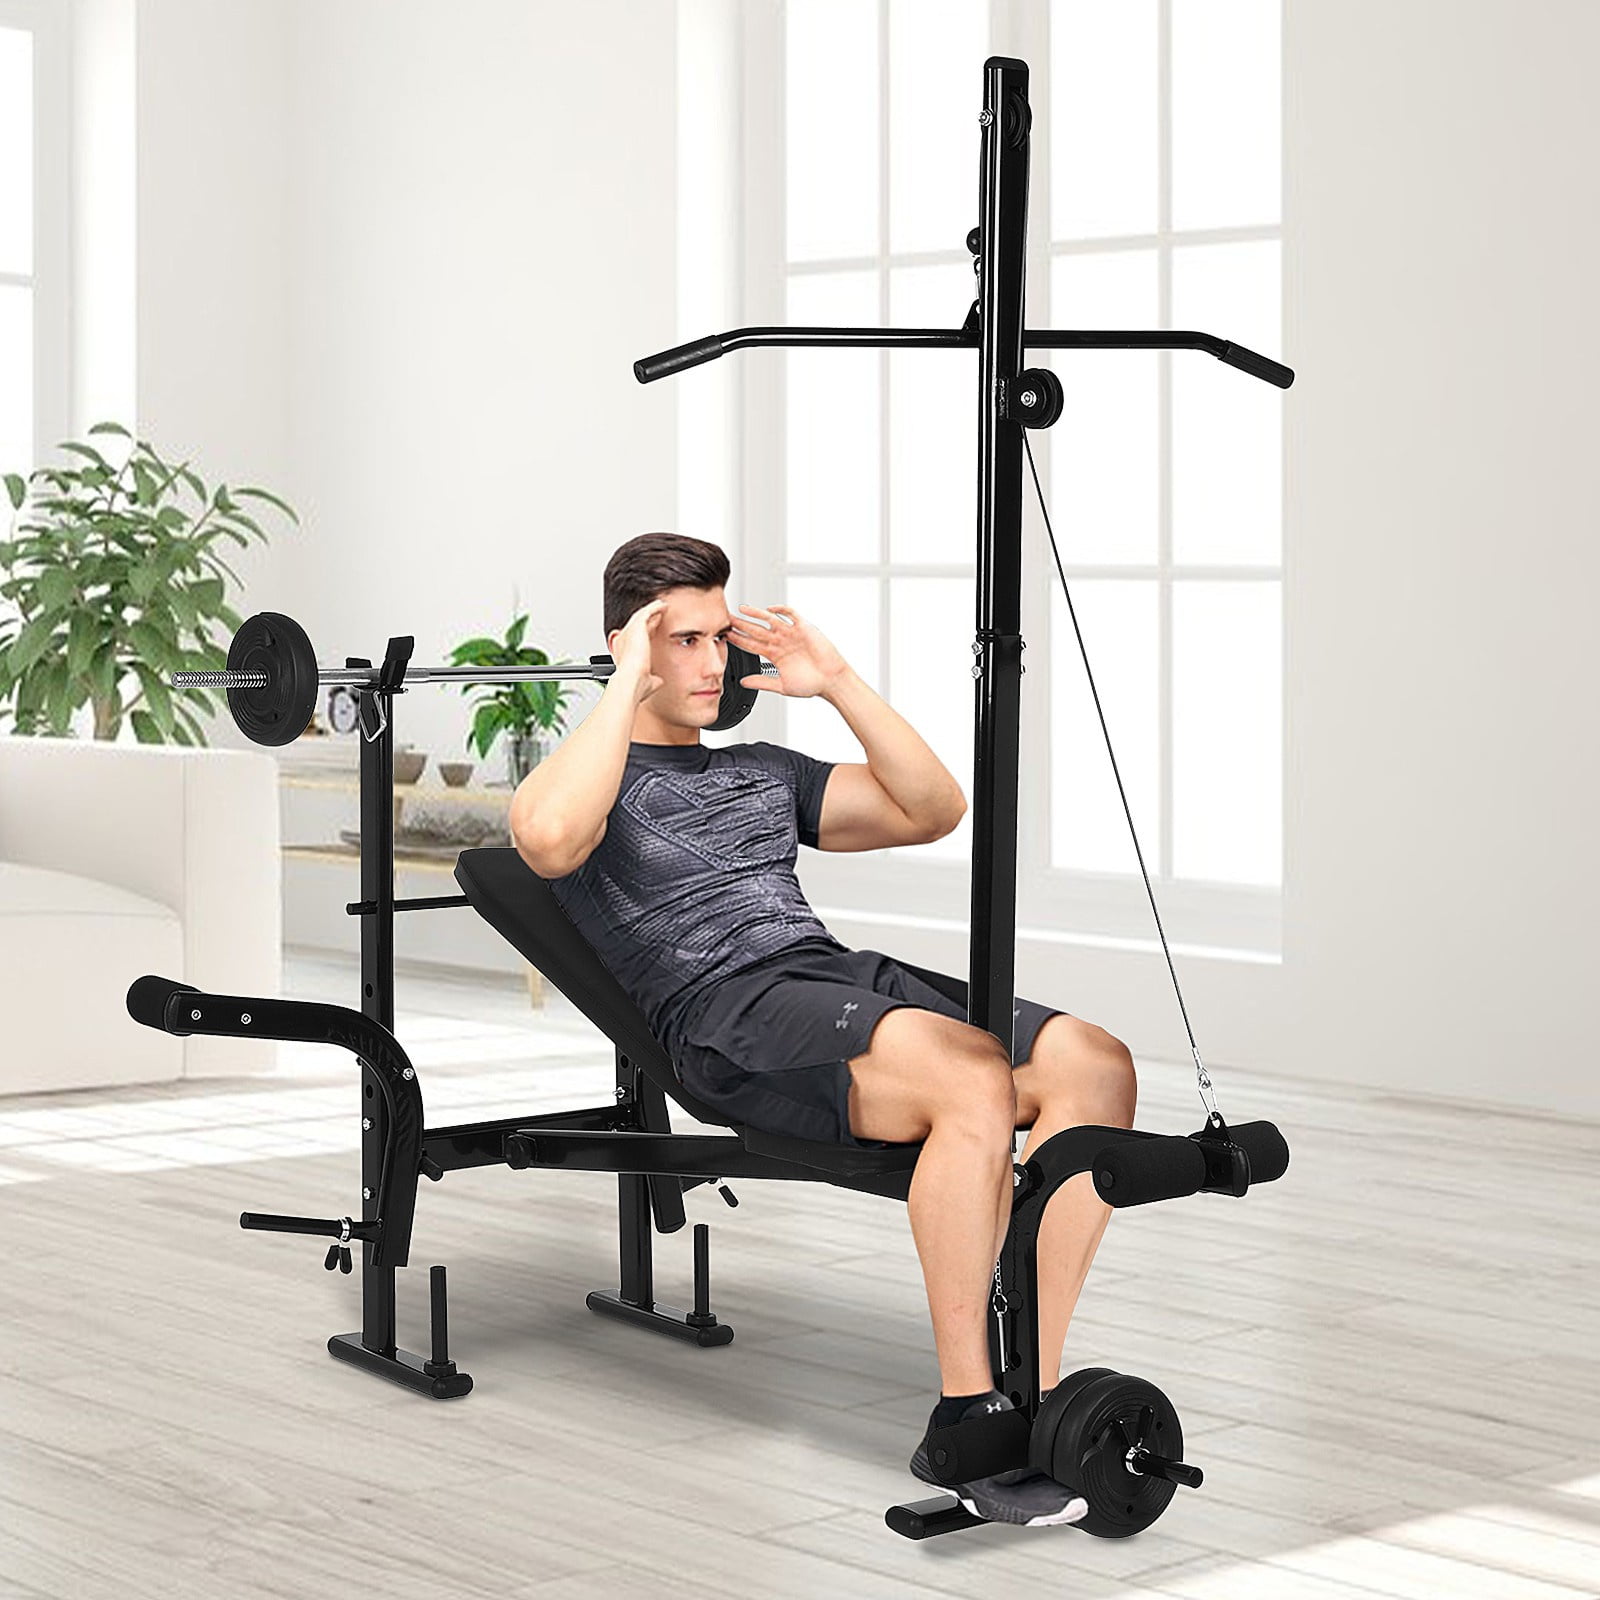 Details about   Weight Bench Adjustable Workout Bench Fitness Barbell Rack Strength Training US 